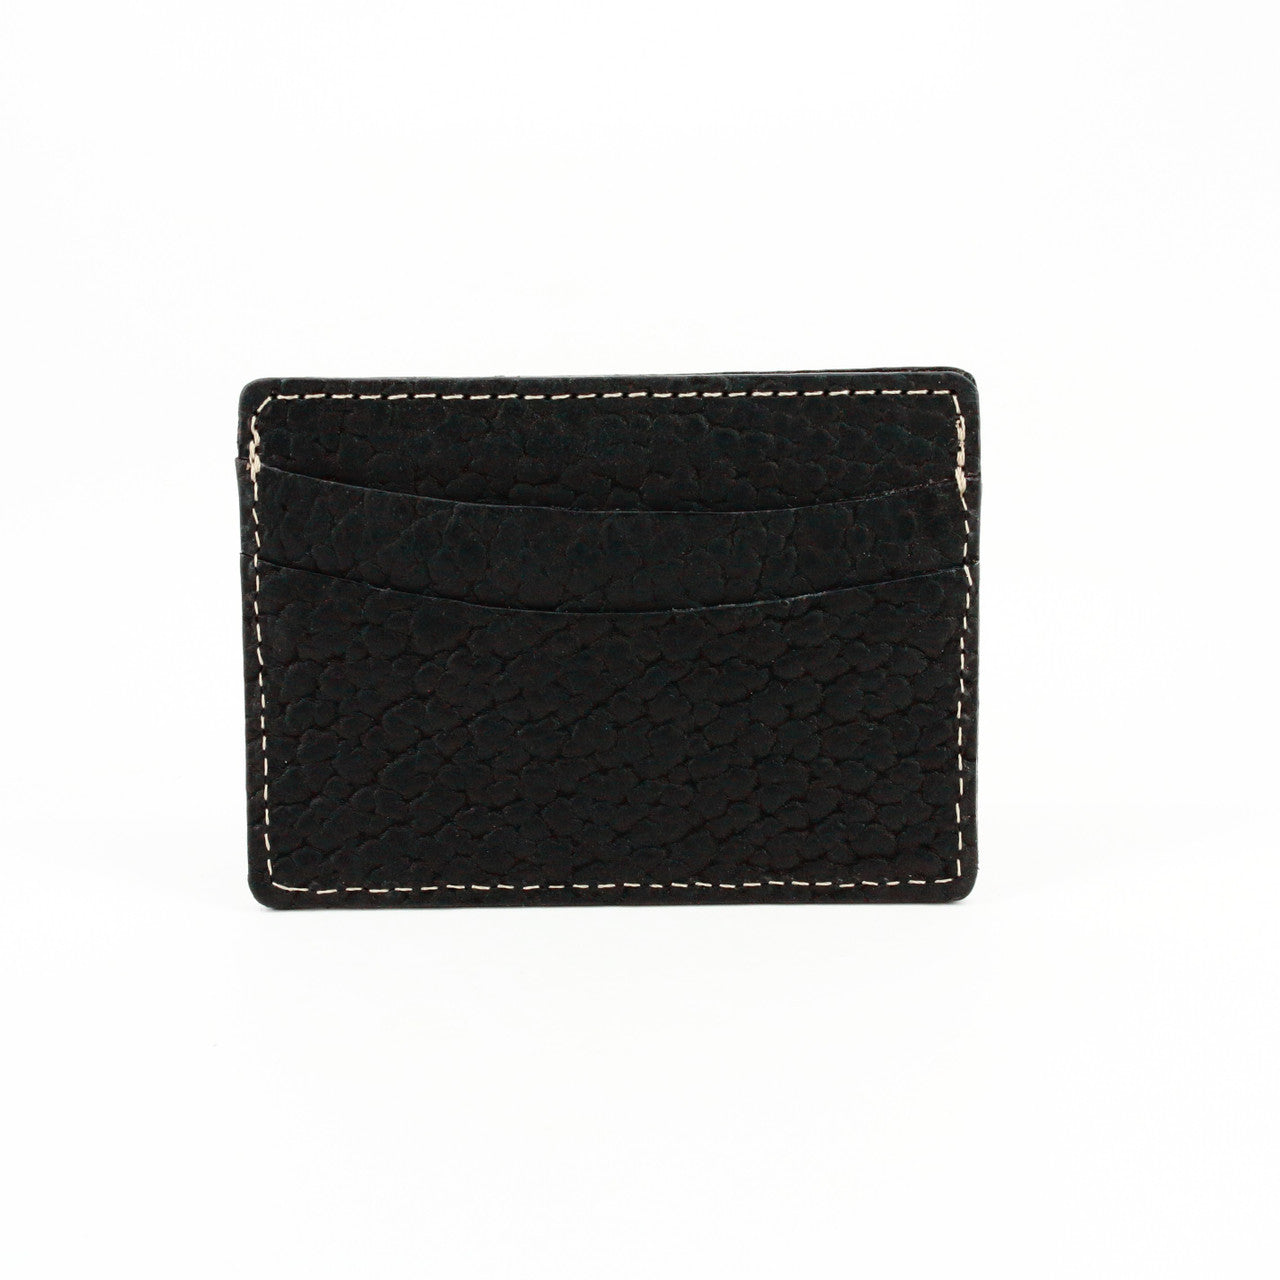 Genuine America Bison Leather Card Case in Black by Torino Leather